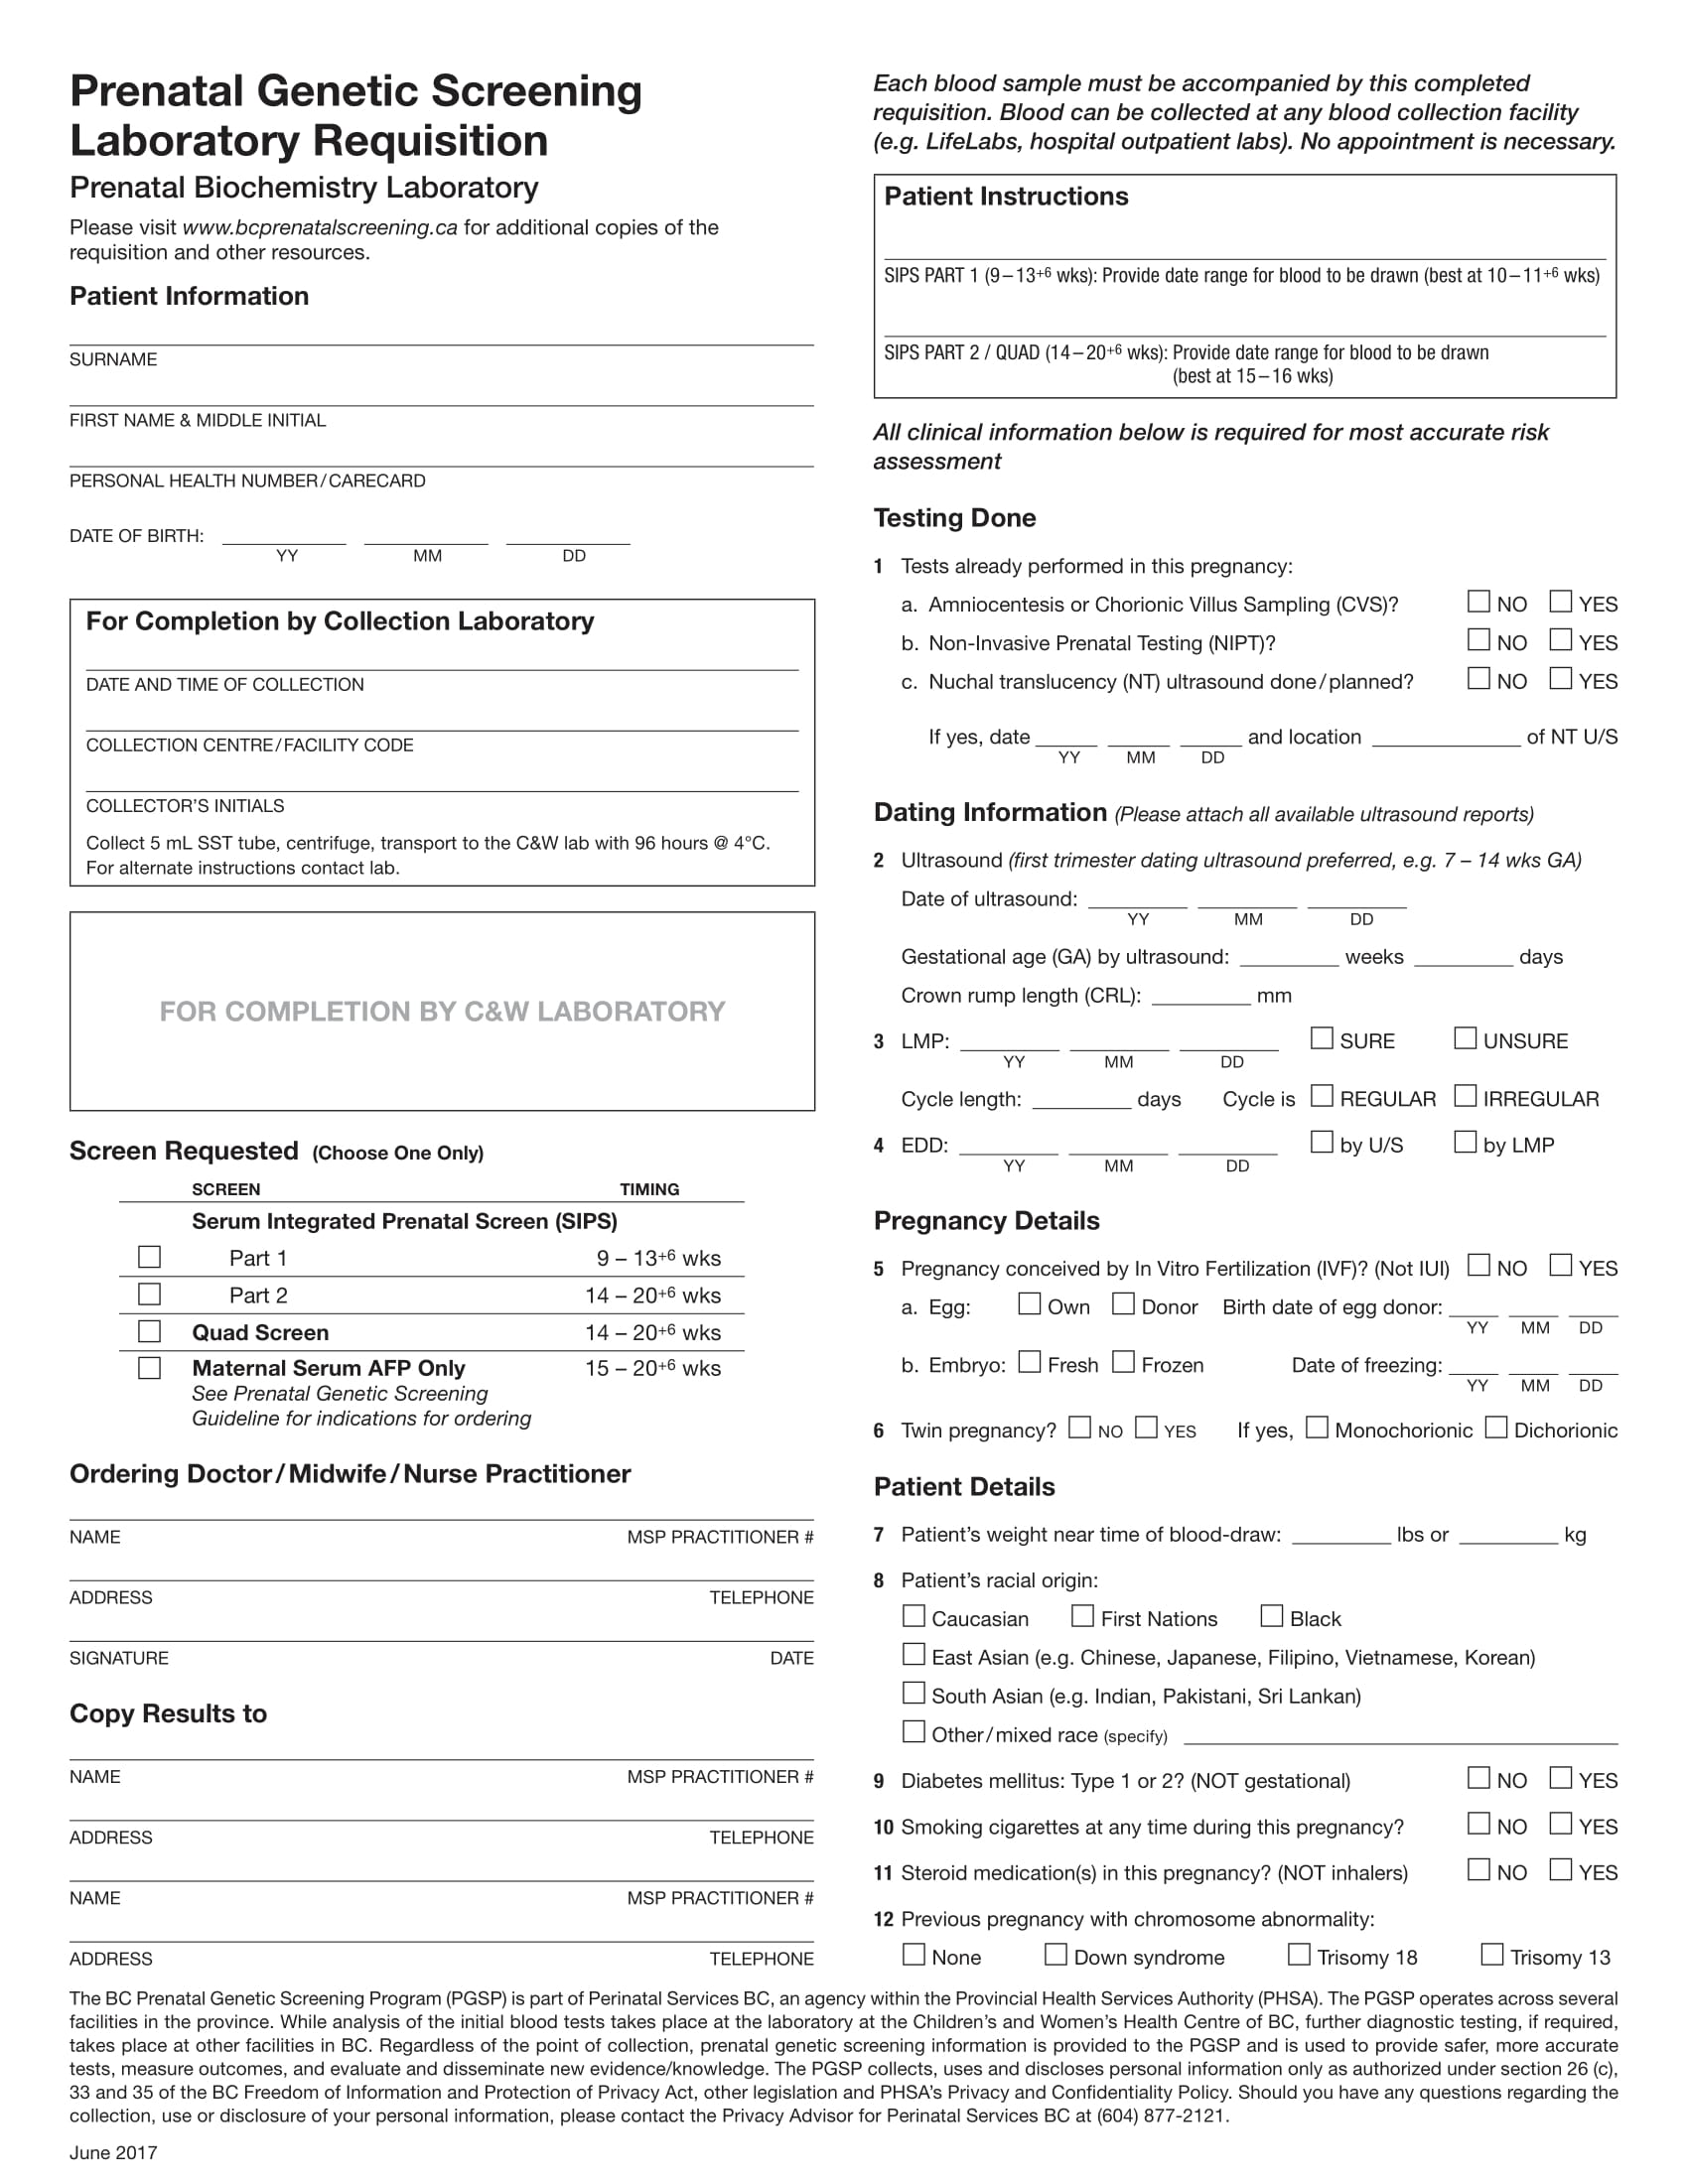 interactive laboratory requisition form 1